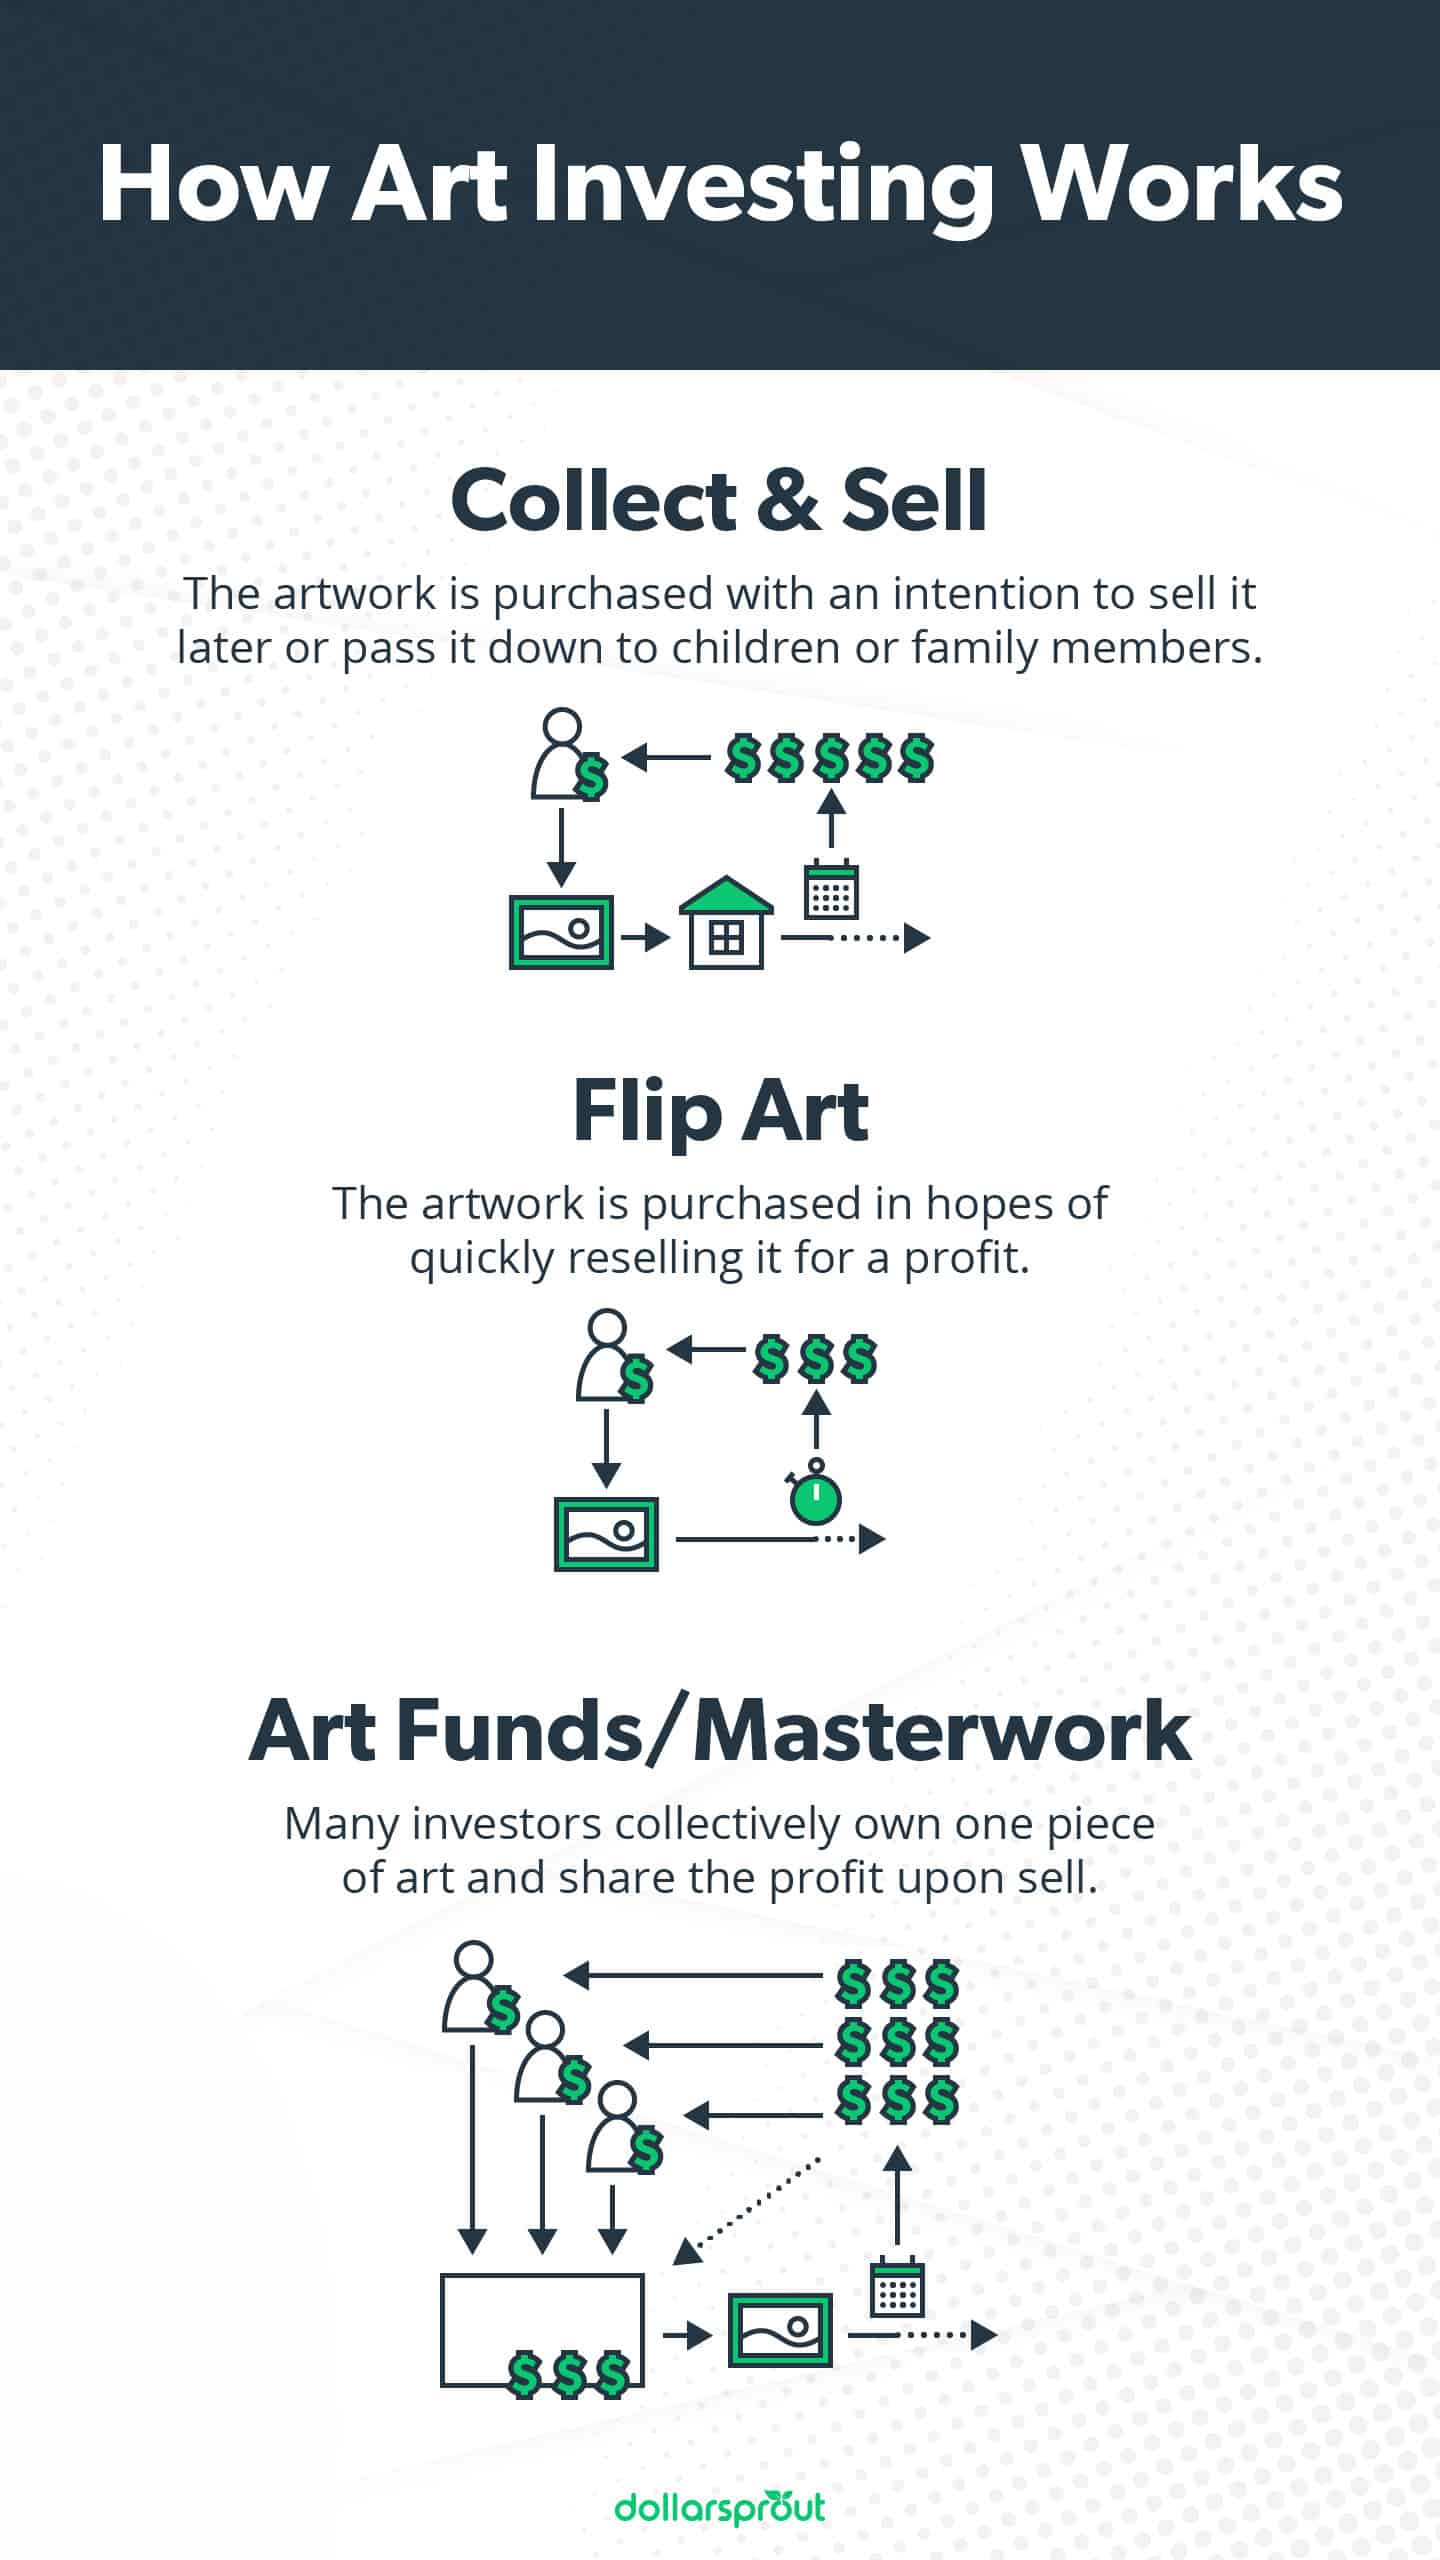 How Art Investing Works